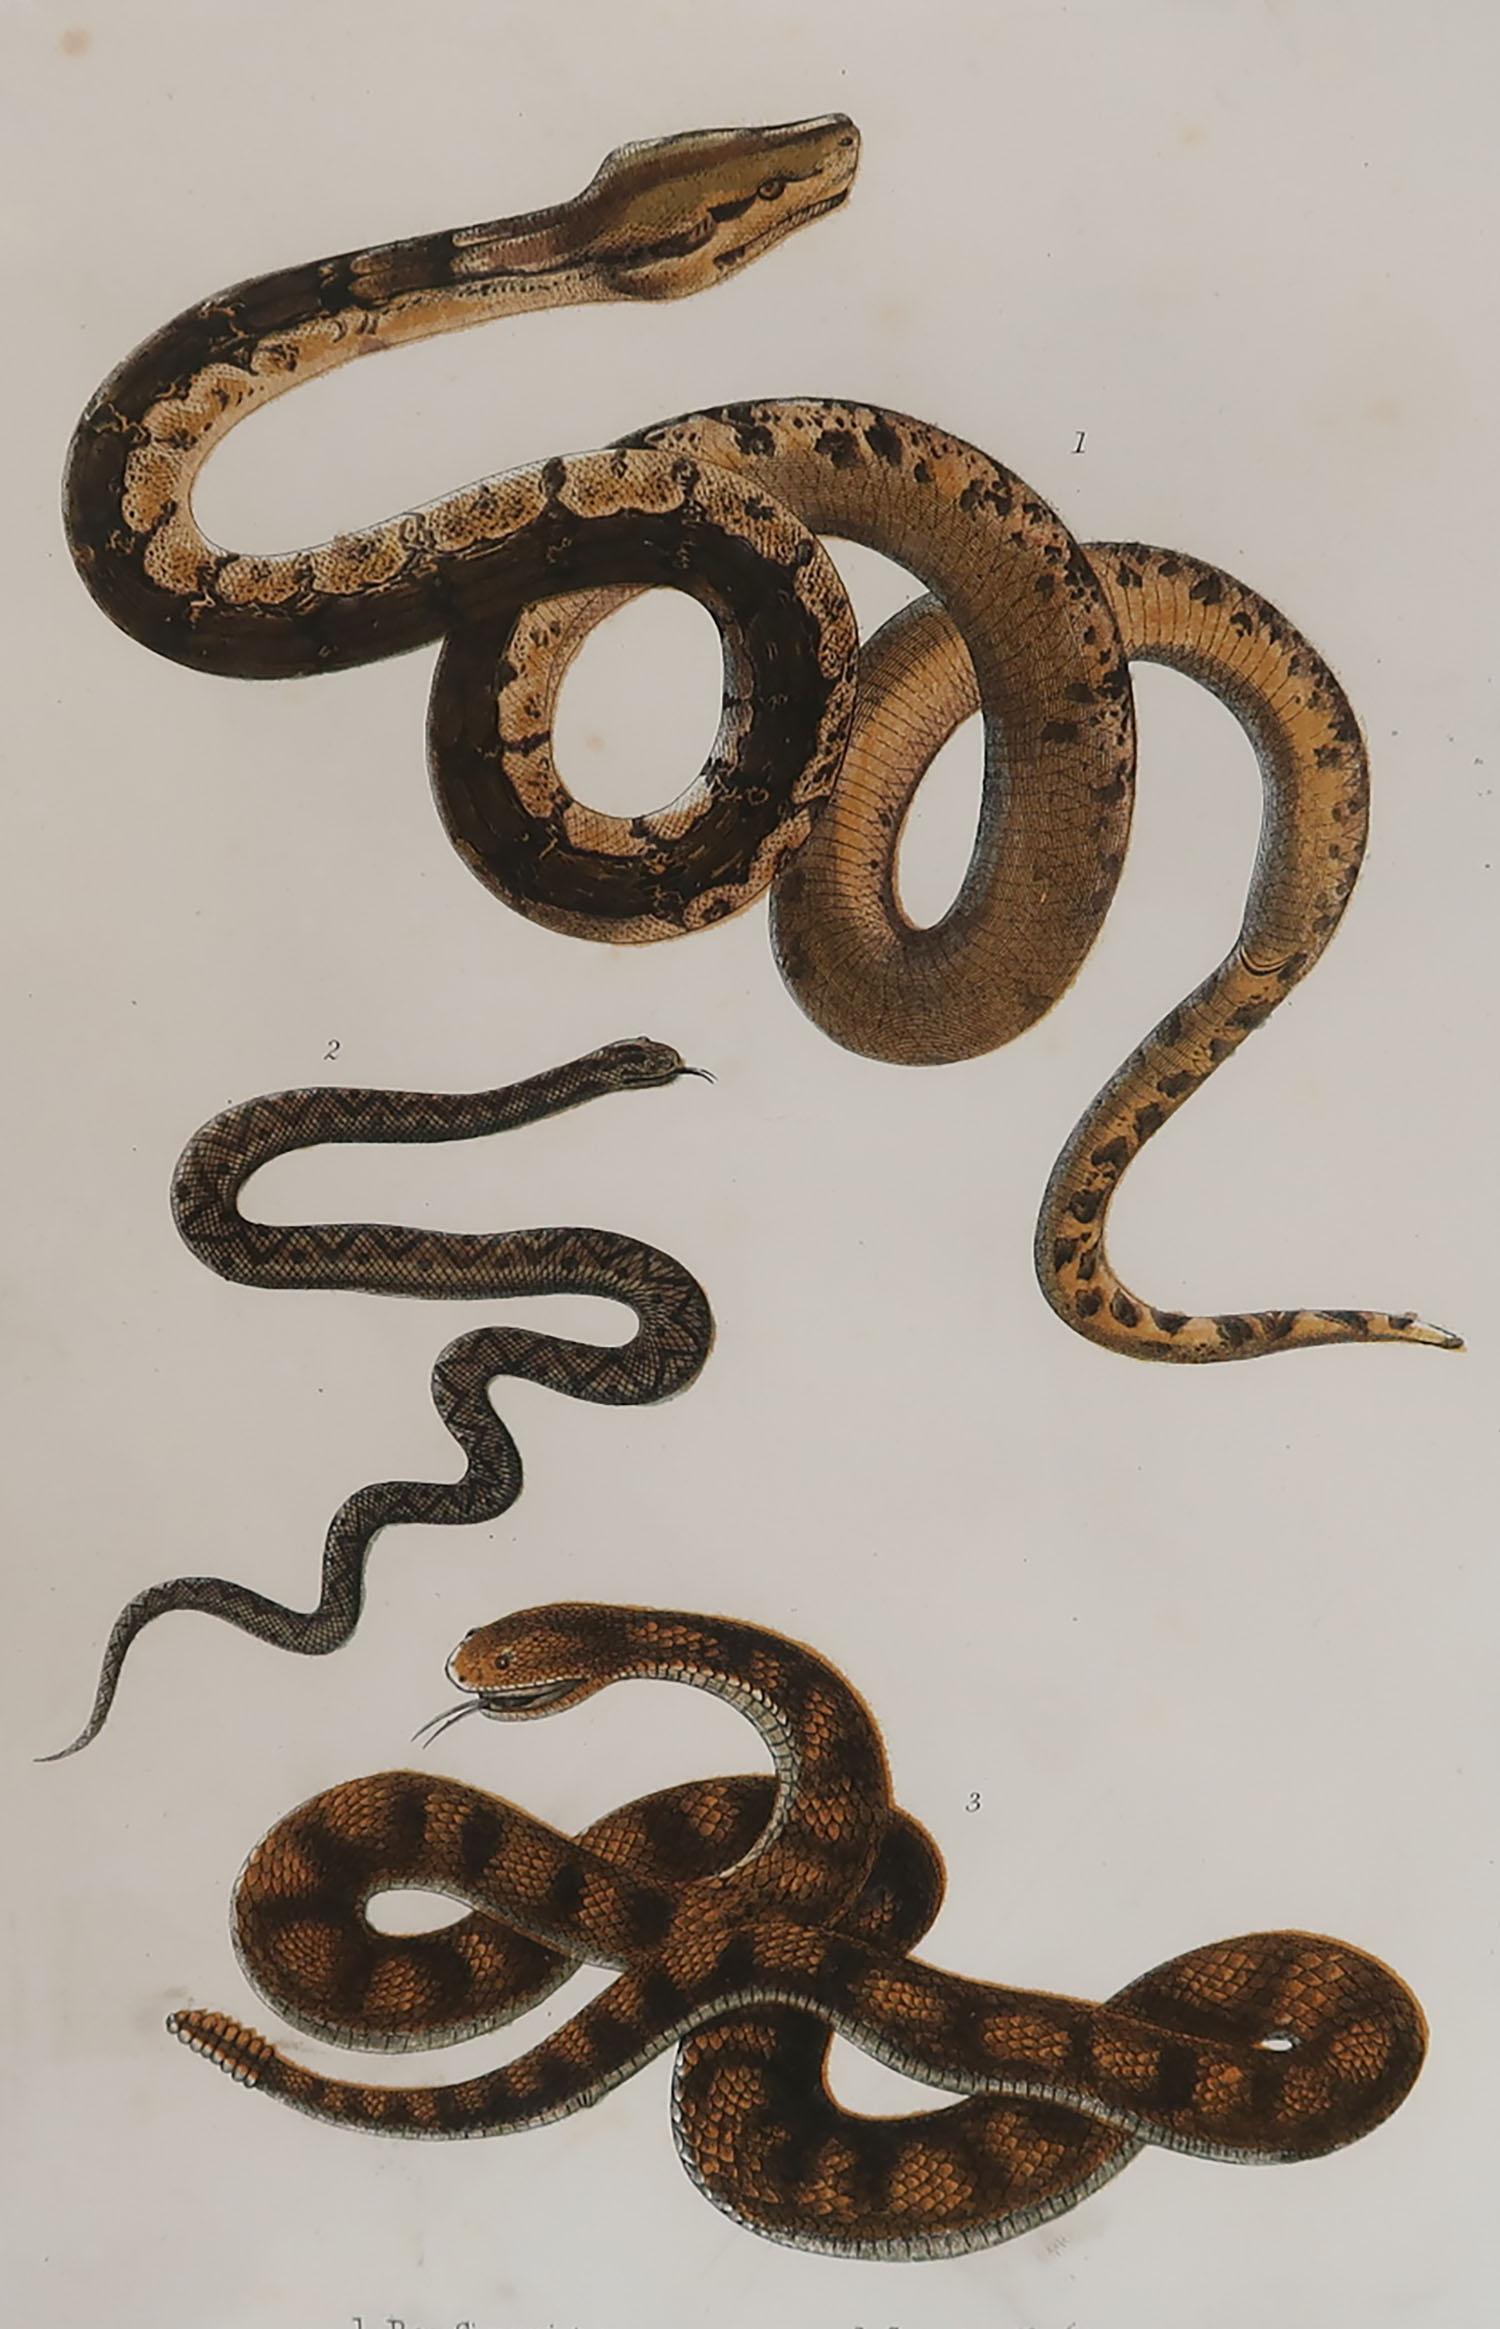 Great image of snakes.

Unframed. It gives you the option of perhaps making a set up using your own choice of frames.

Lithograph after Cpt. Brown with original hand color.

Published, 1847.

Repair to a tiny edge tear at the